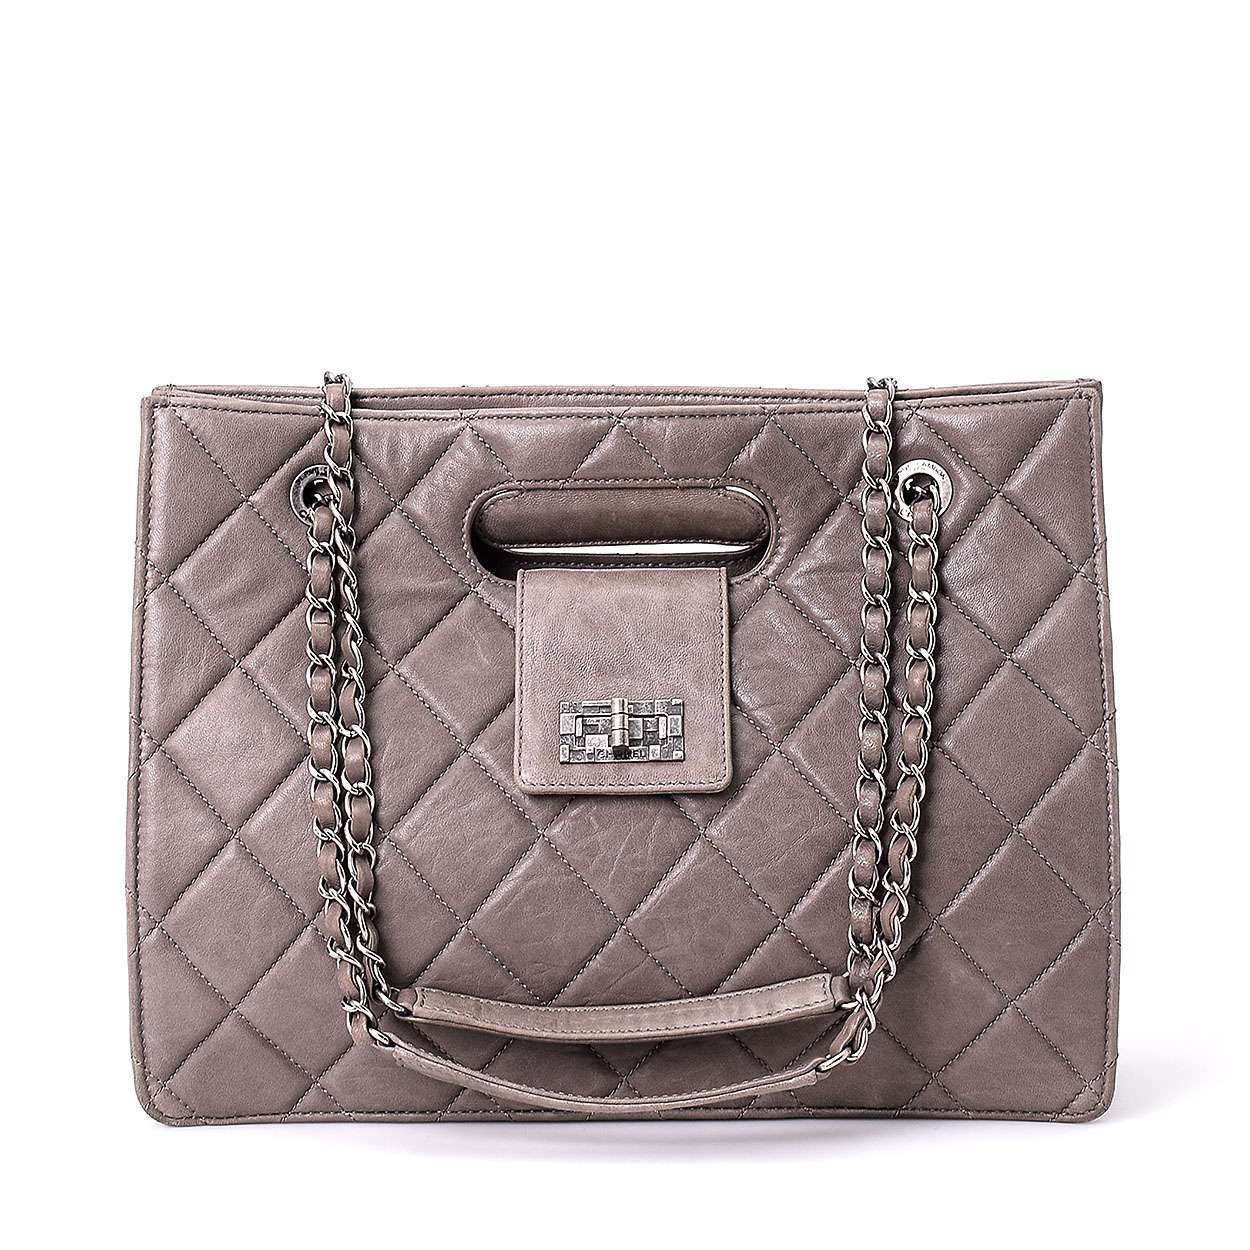 Chanel - Grey Quilted Lambskin Leather Top Handle and Shoulder Bag 